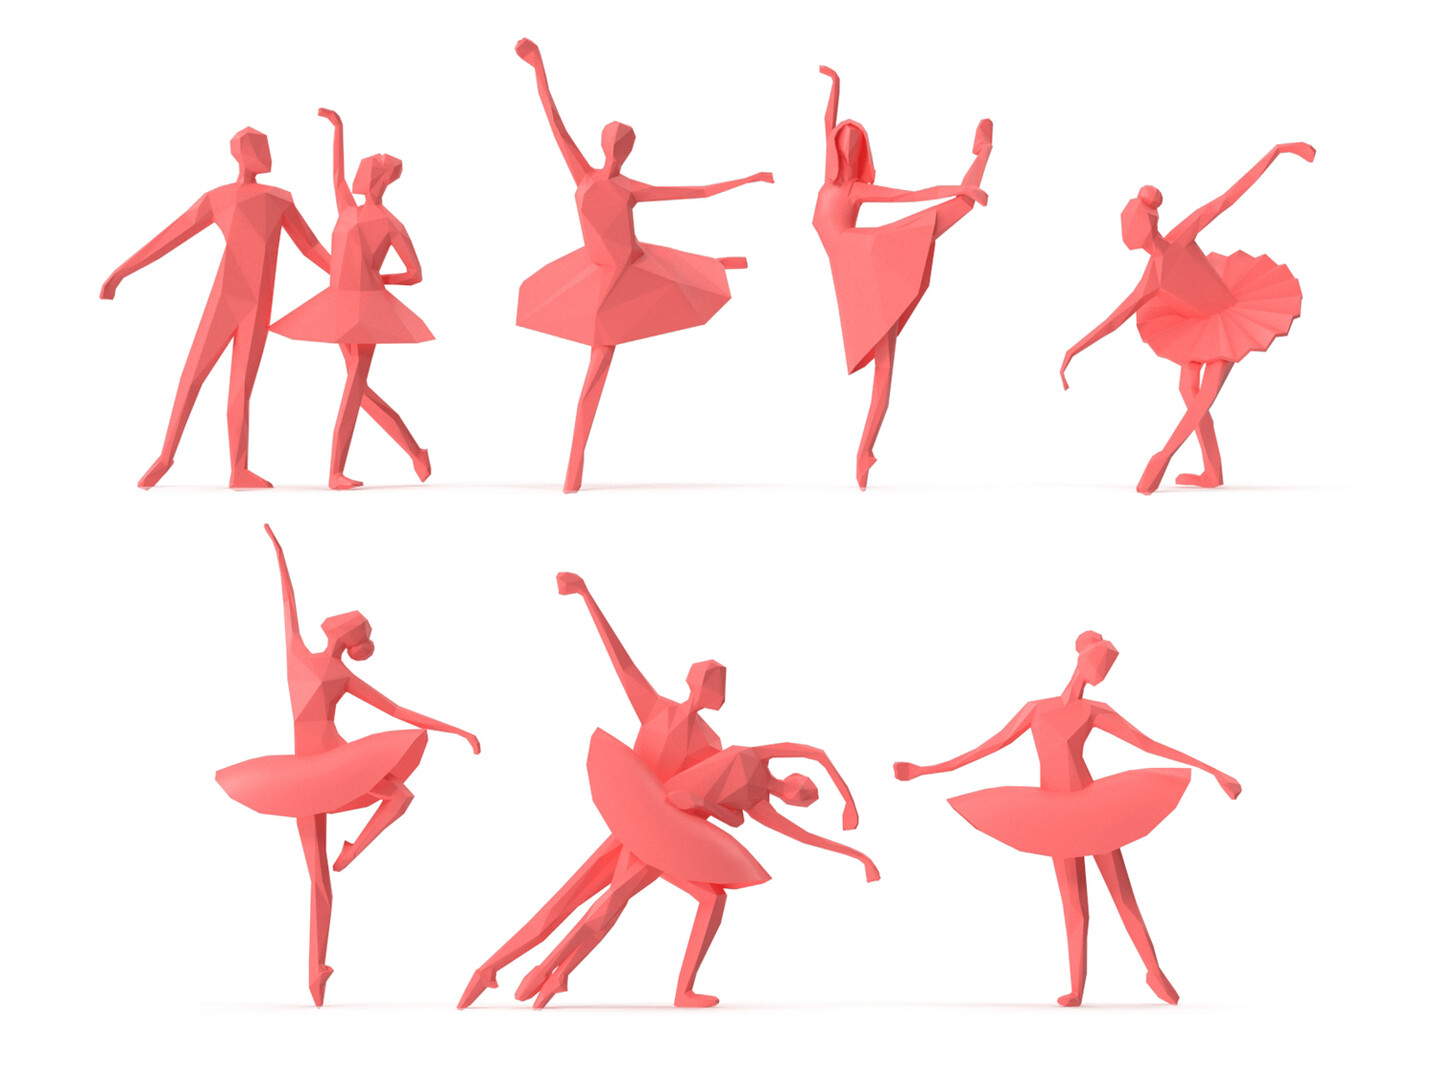 Low Poly Posed People Pack 19 - Ballet Ballerina